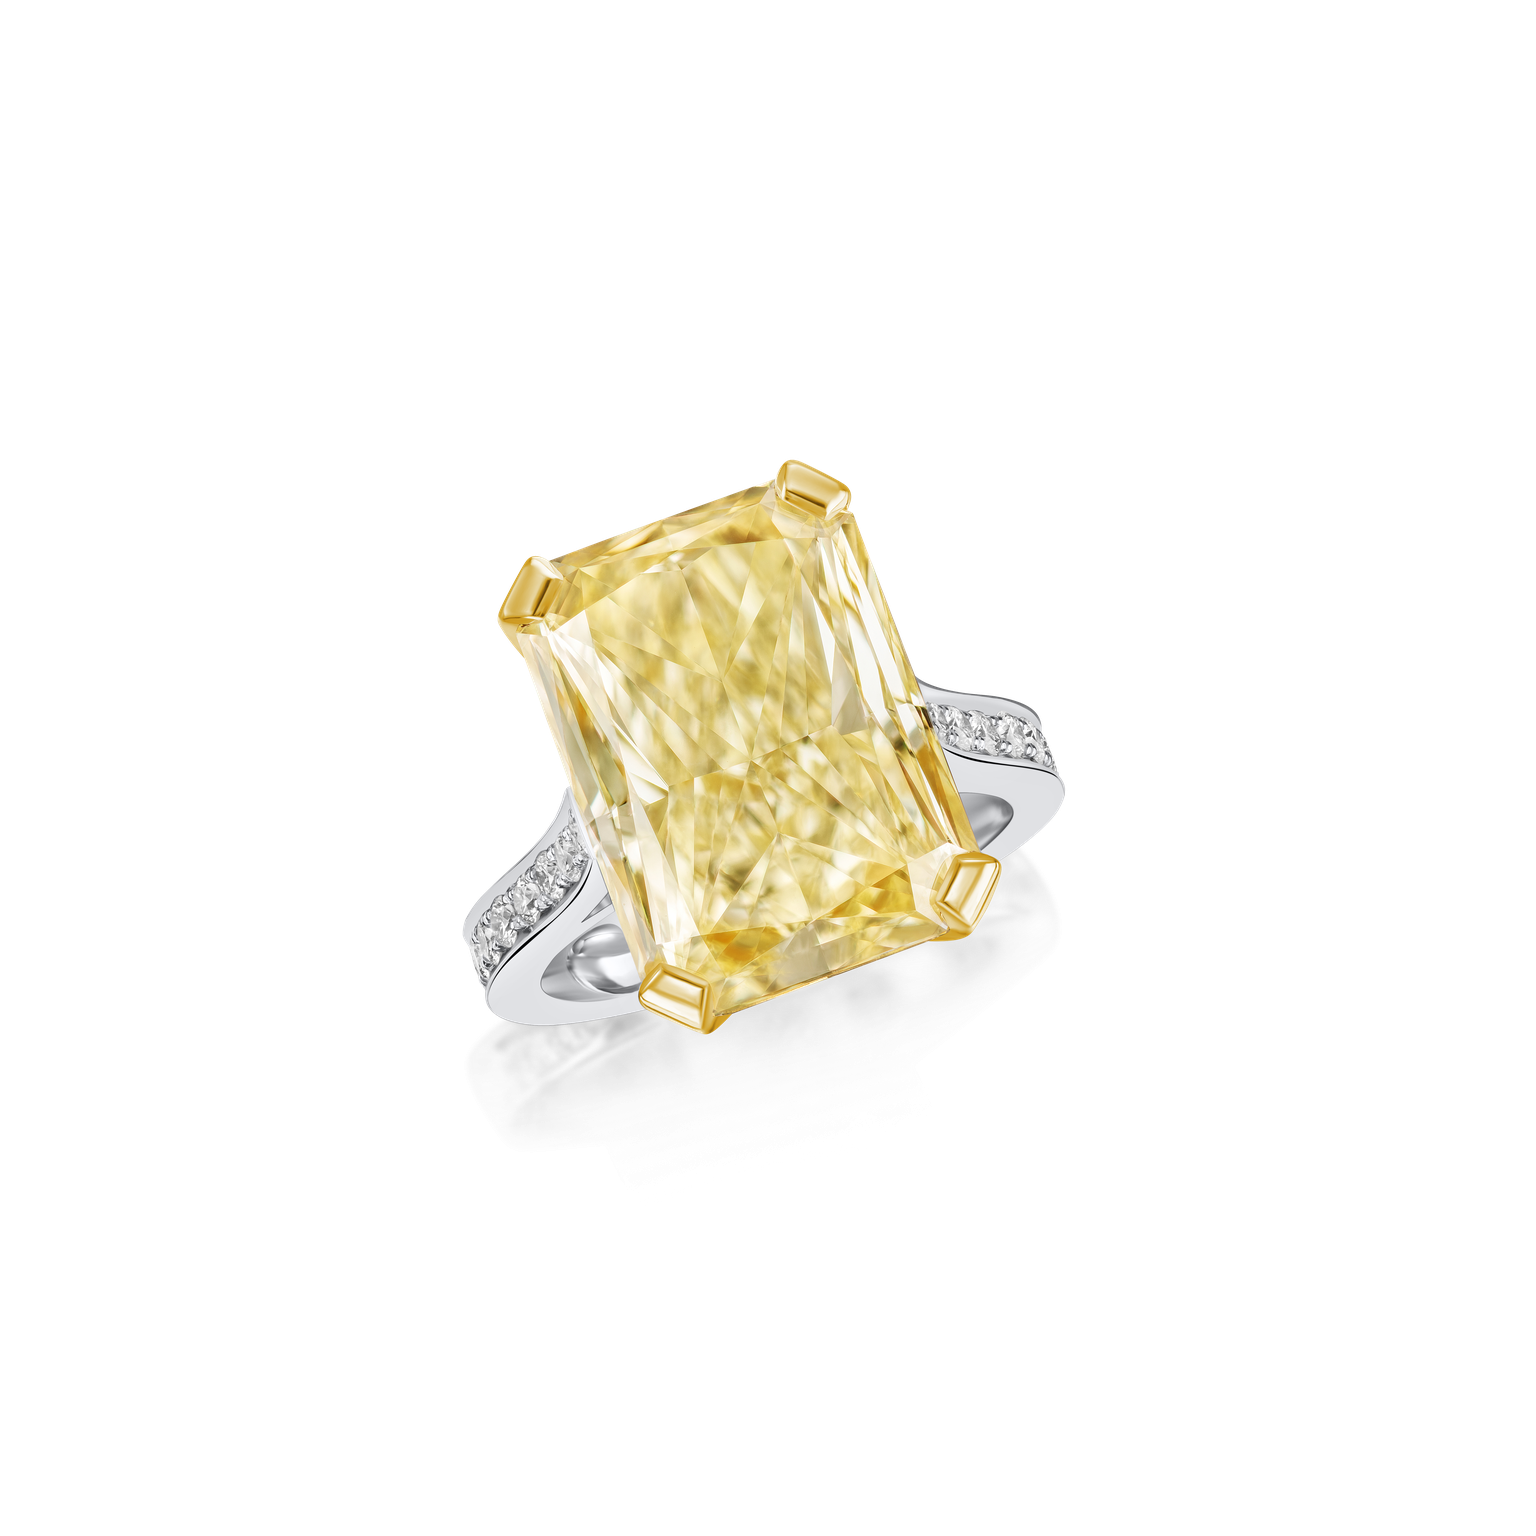 11.18cts Natural Fancy Yellow Diamond Ring